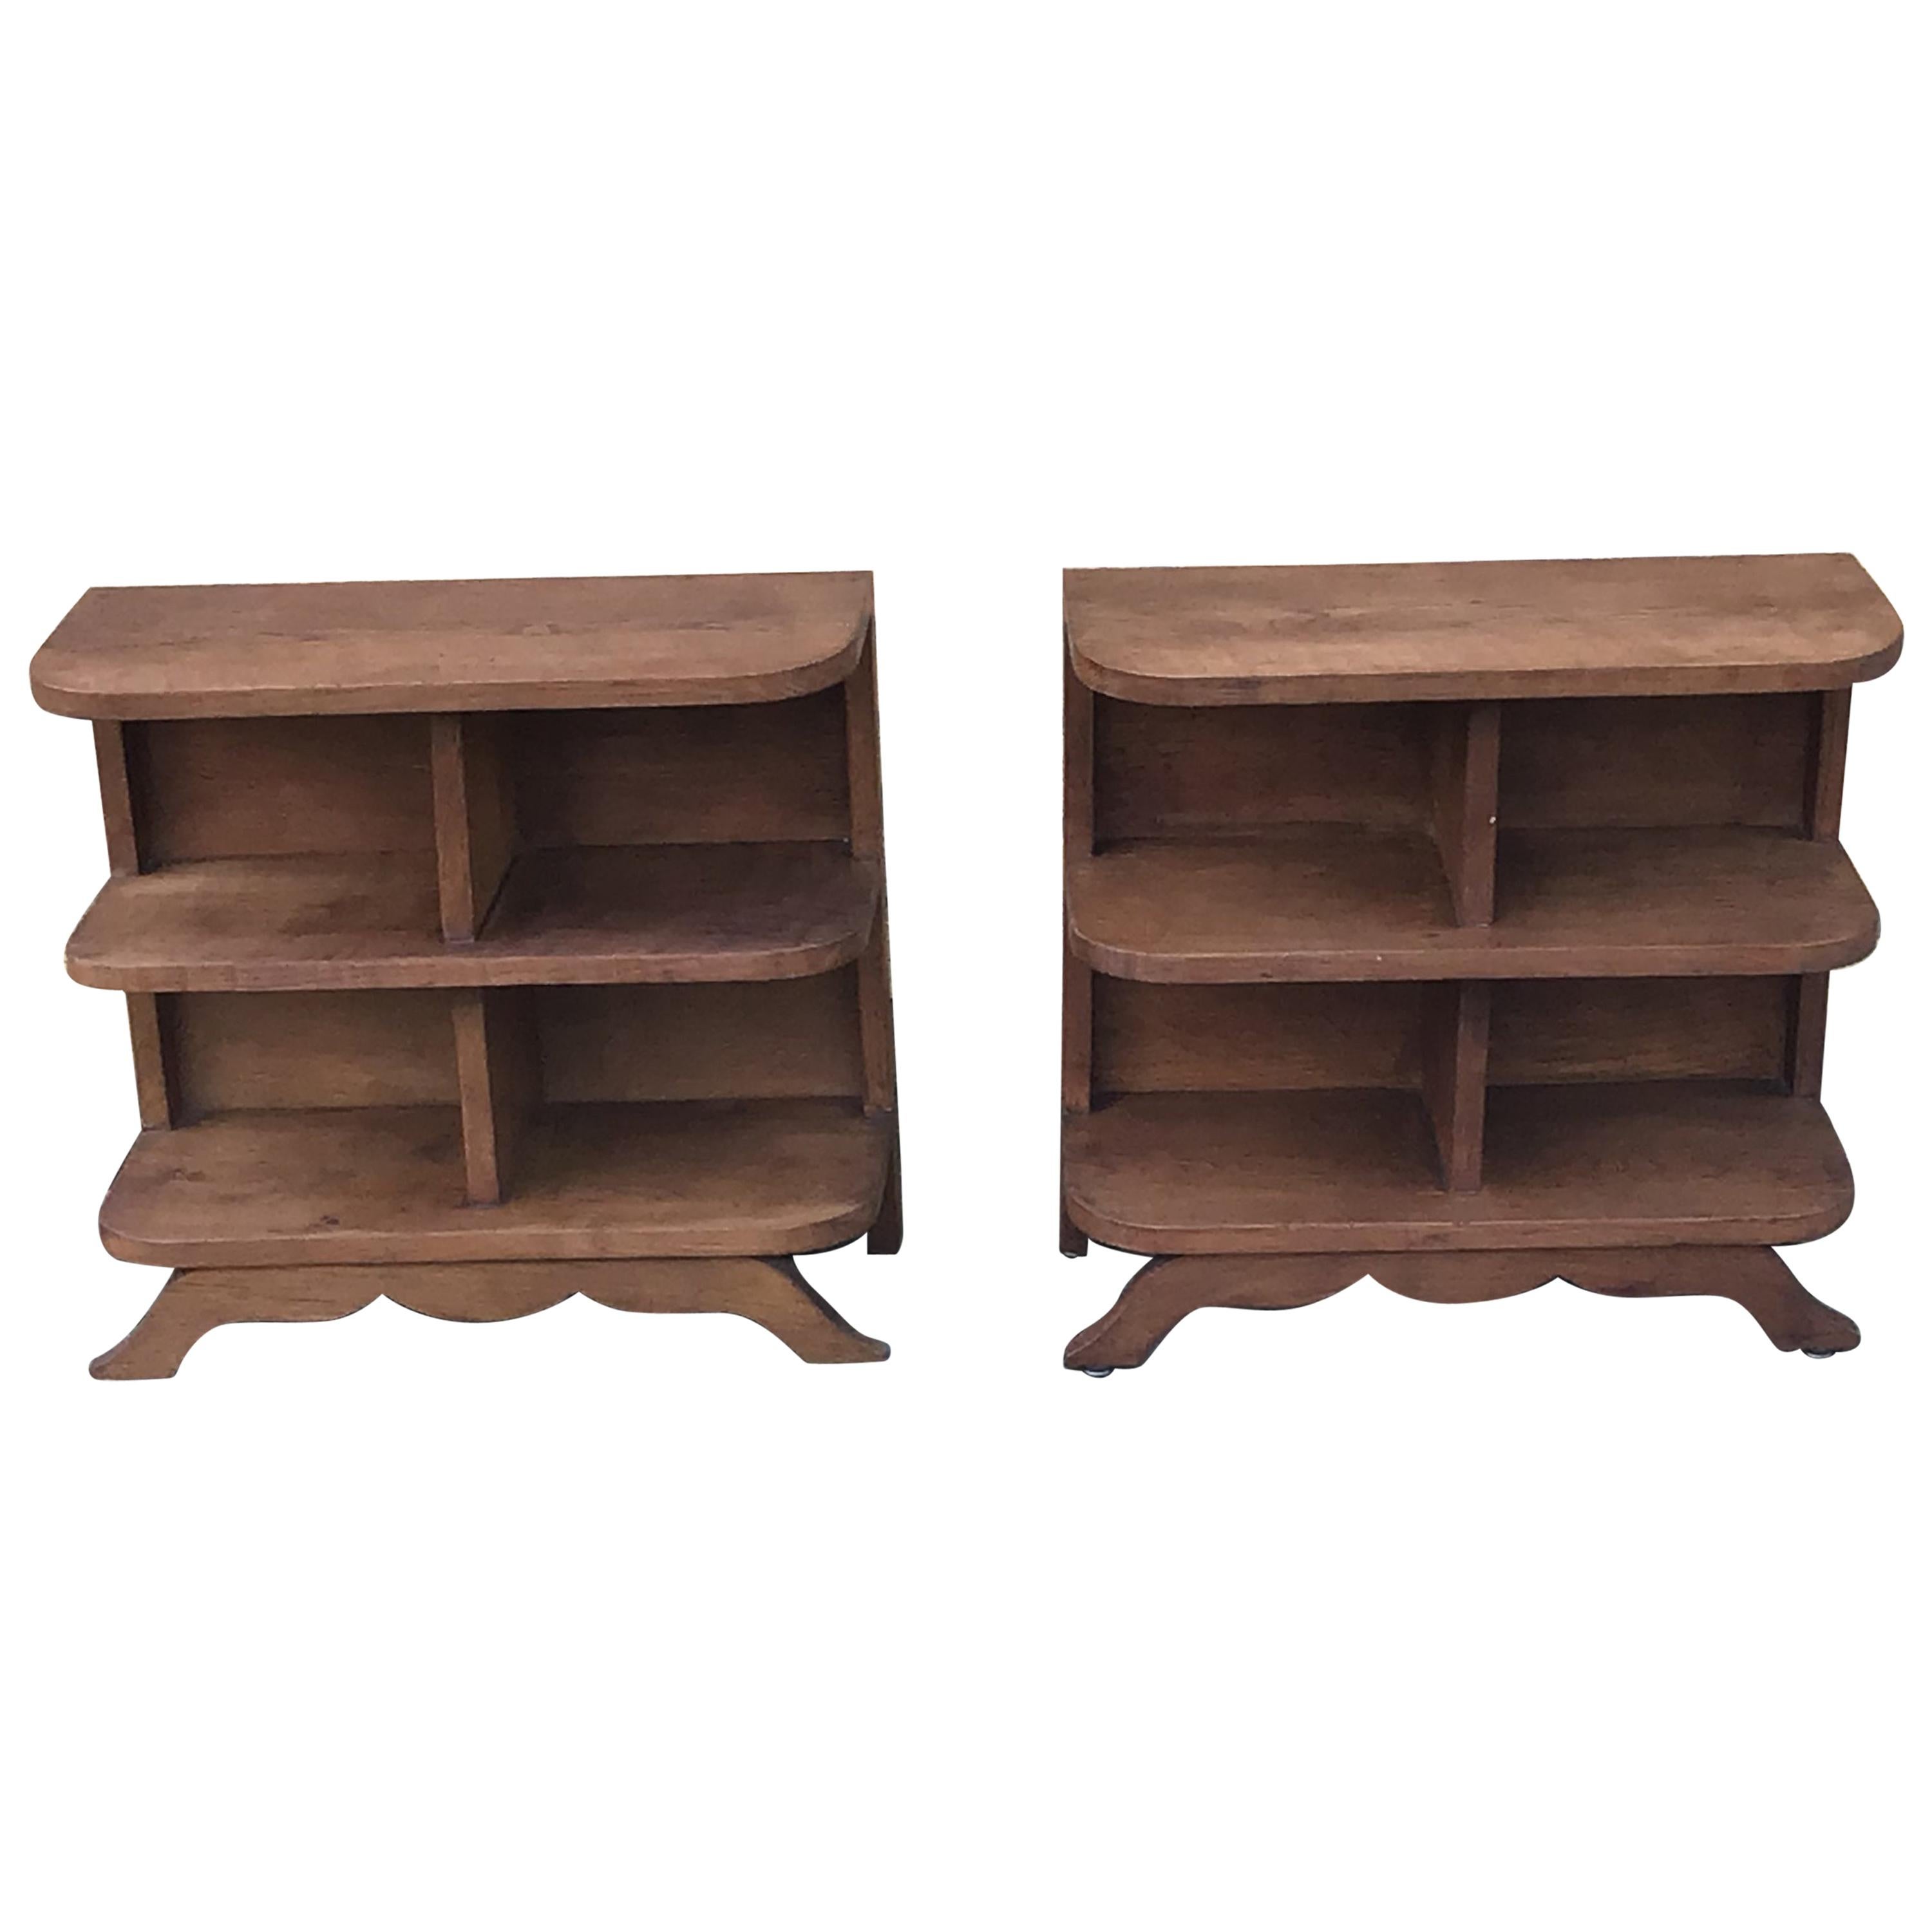 1930s French Deco Bookcases/1930s Bedside Tables/1930s Storage Cabinets